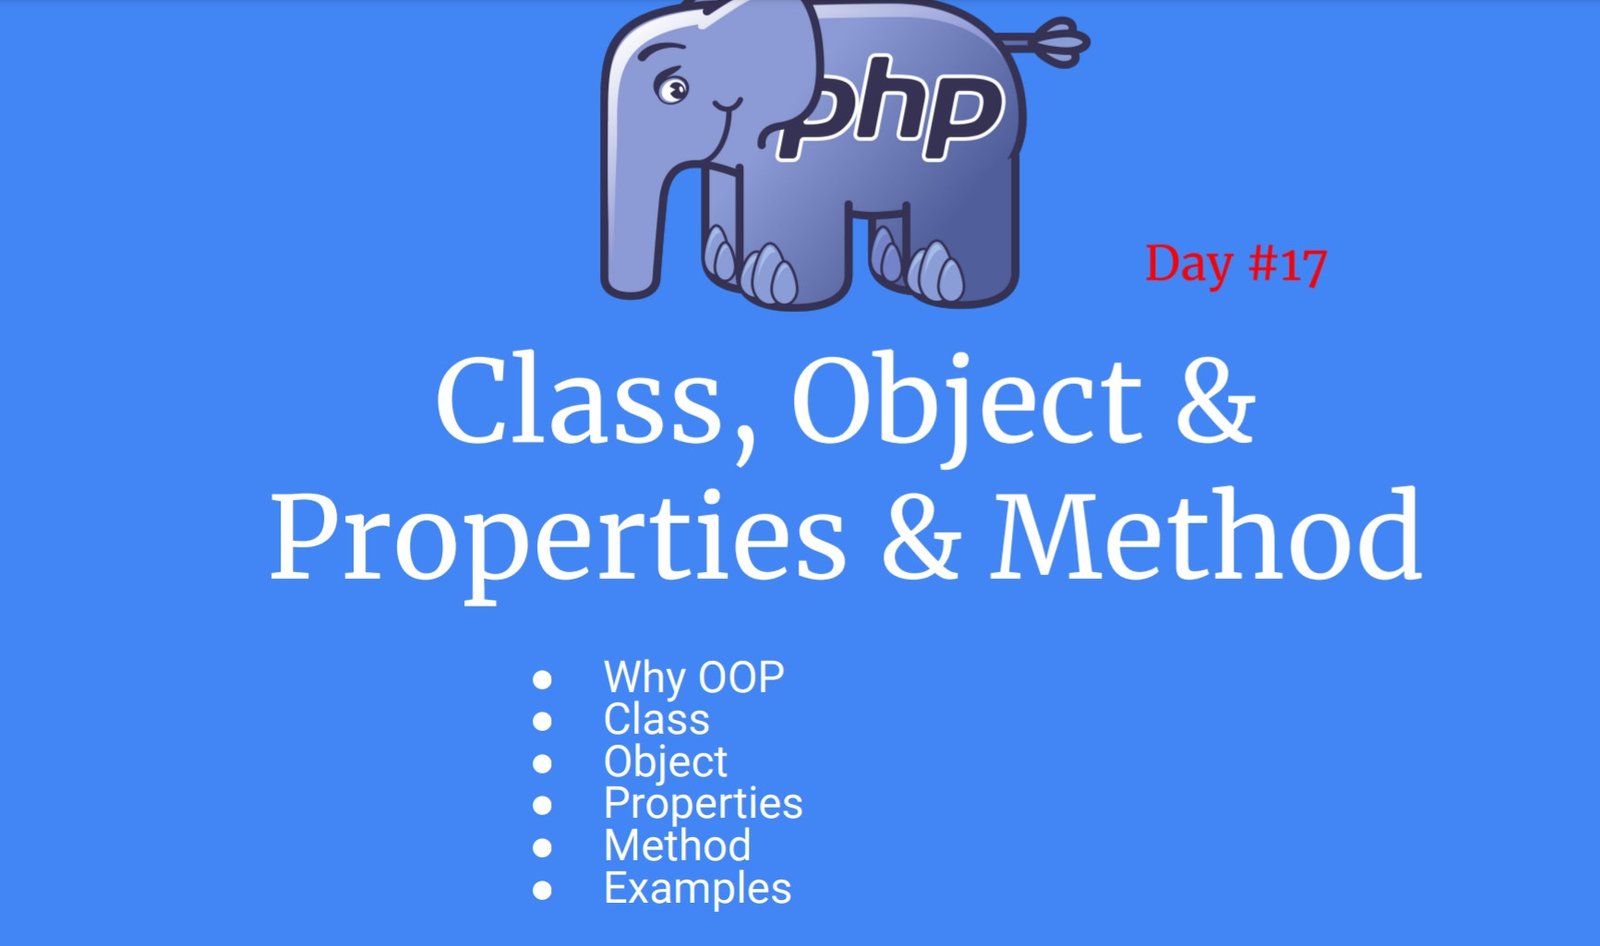 PHP OOP - Object Oriented Programming Introduction